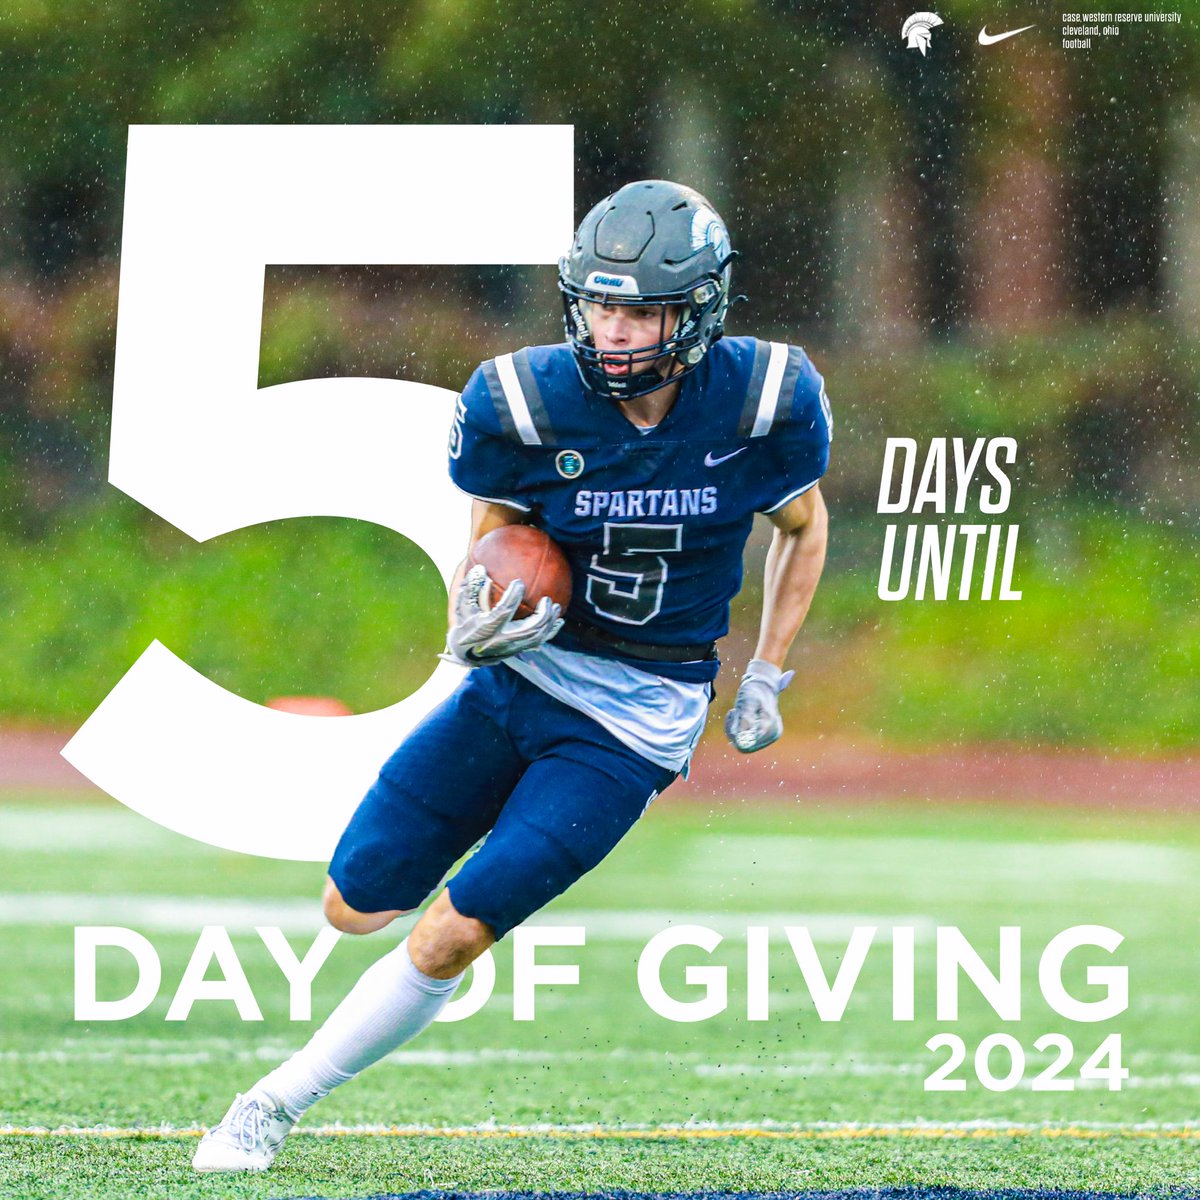 𝟓 𝐝𝐚𝐲𝐬 𝐮𝐧𝐭𝐢𝐥 𝐭𝐡𝐞 𝐃𝐚𝐲 𝐨𝐟 𝐆𝐢𝐯𝐢𝐧𝐠! Funds raised during the Day of Giving will be designated to our Intern Coaching Program. #d3fb #BlueCWRU #RollSpartans